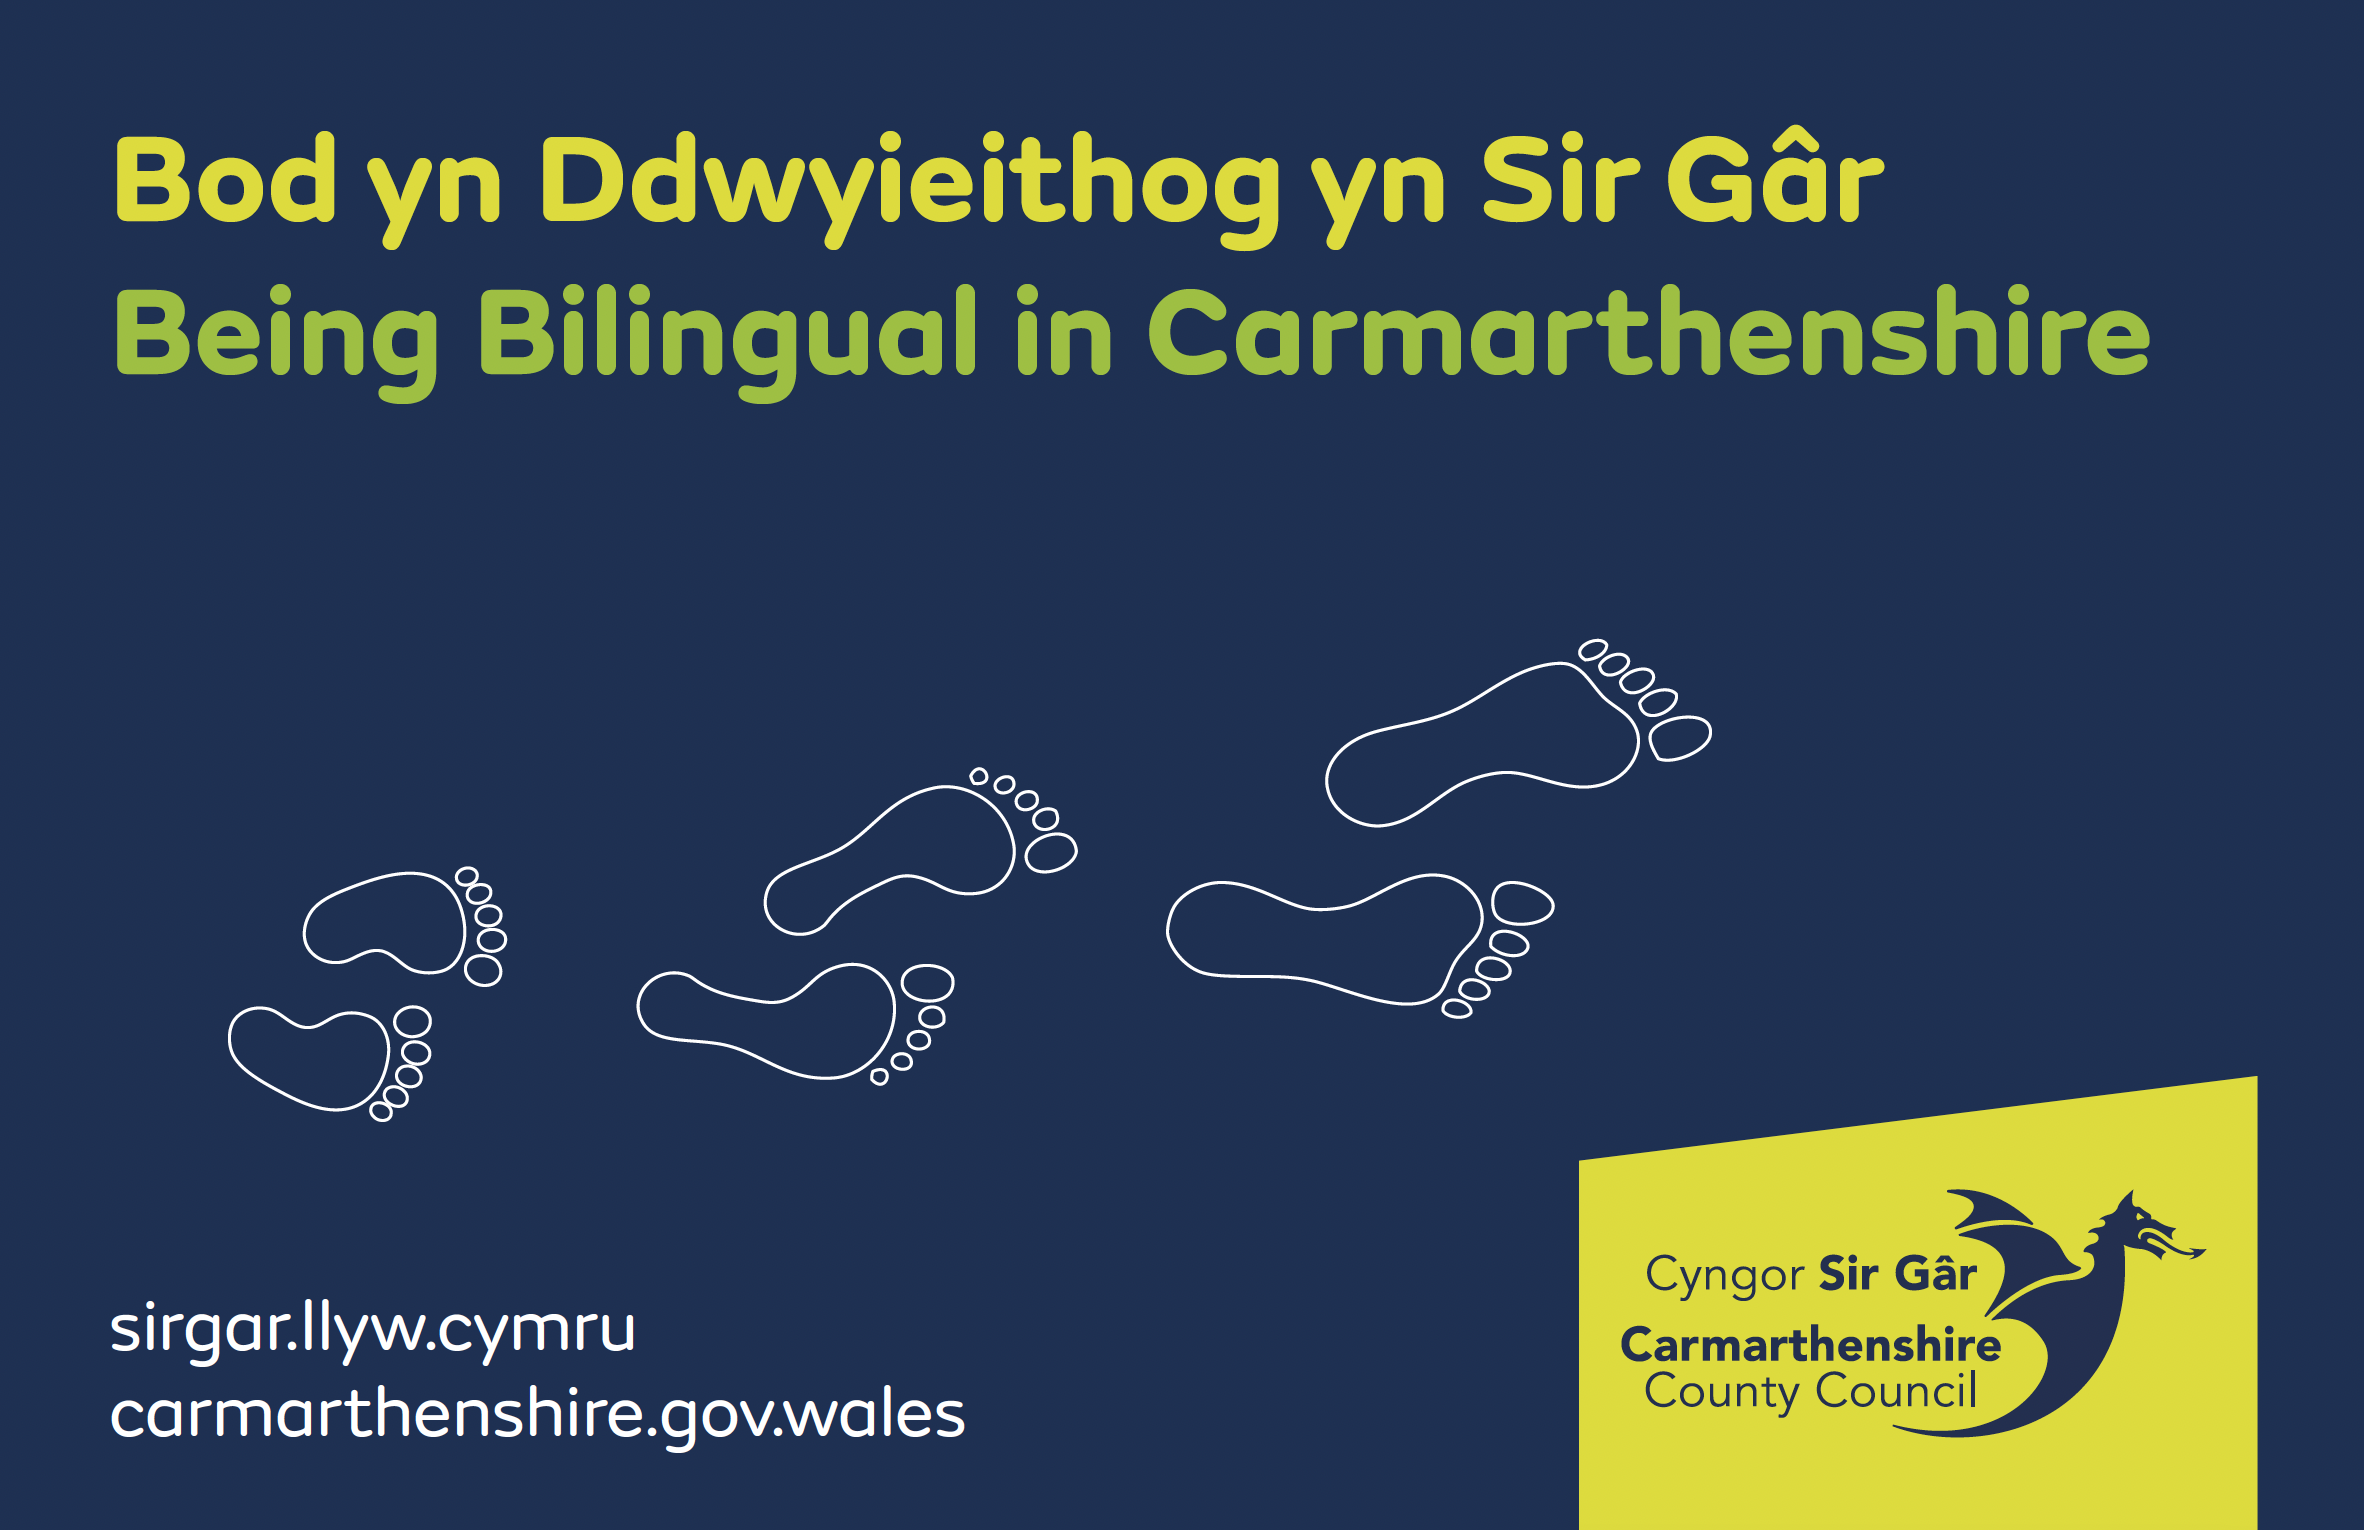 Being Bilingual in Carmarthenshire